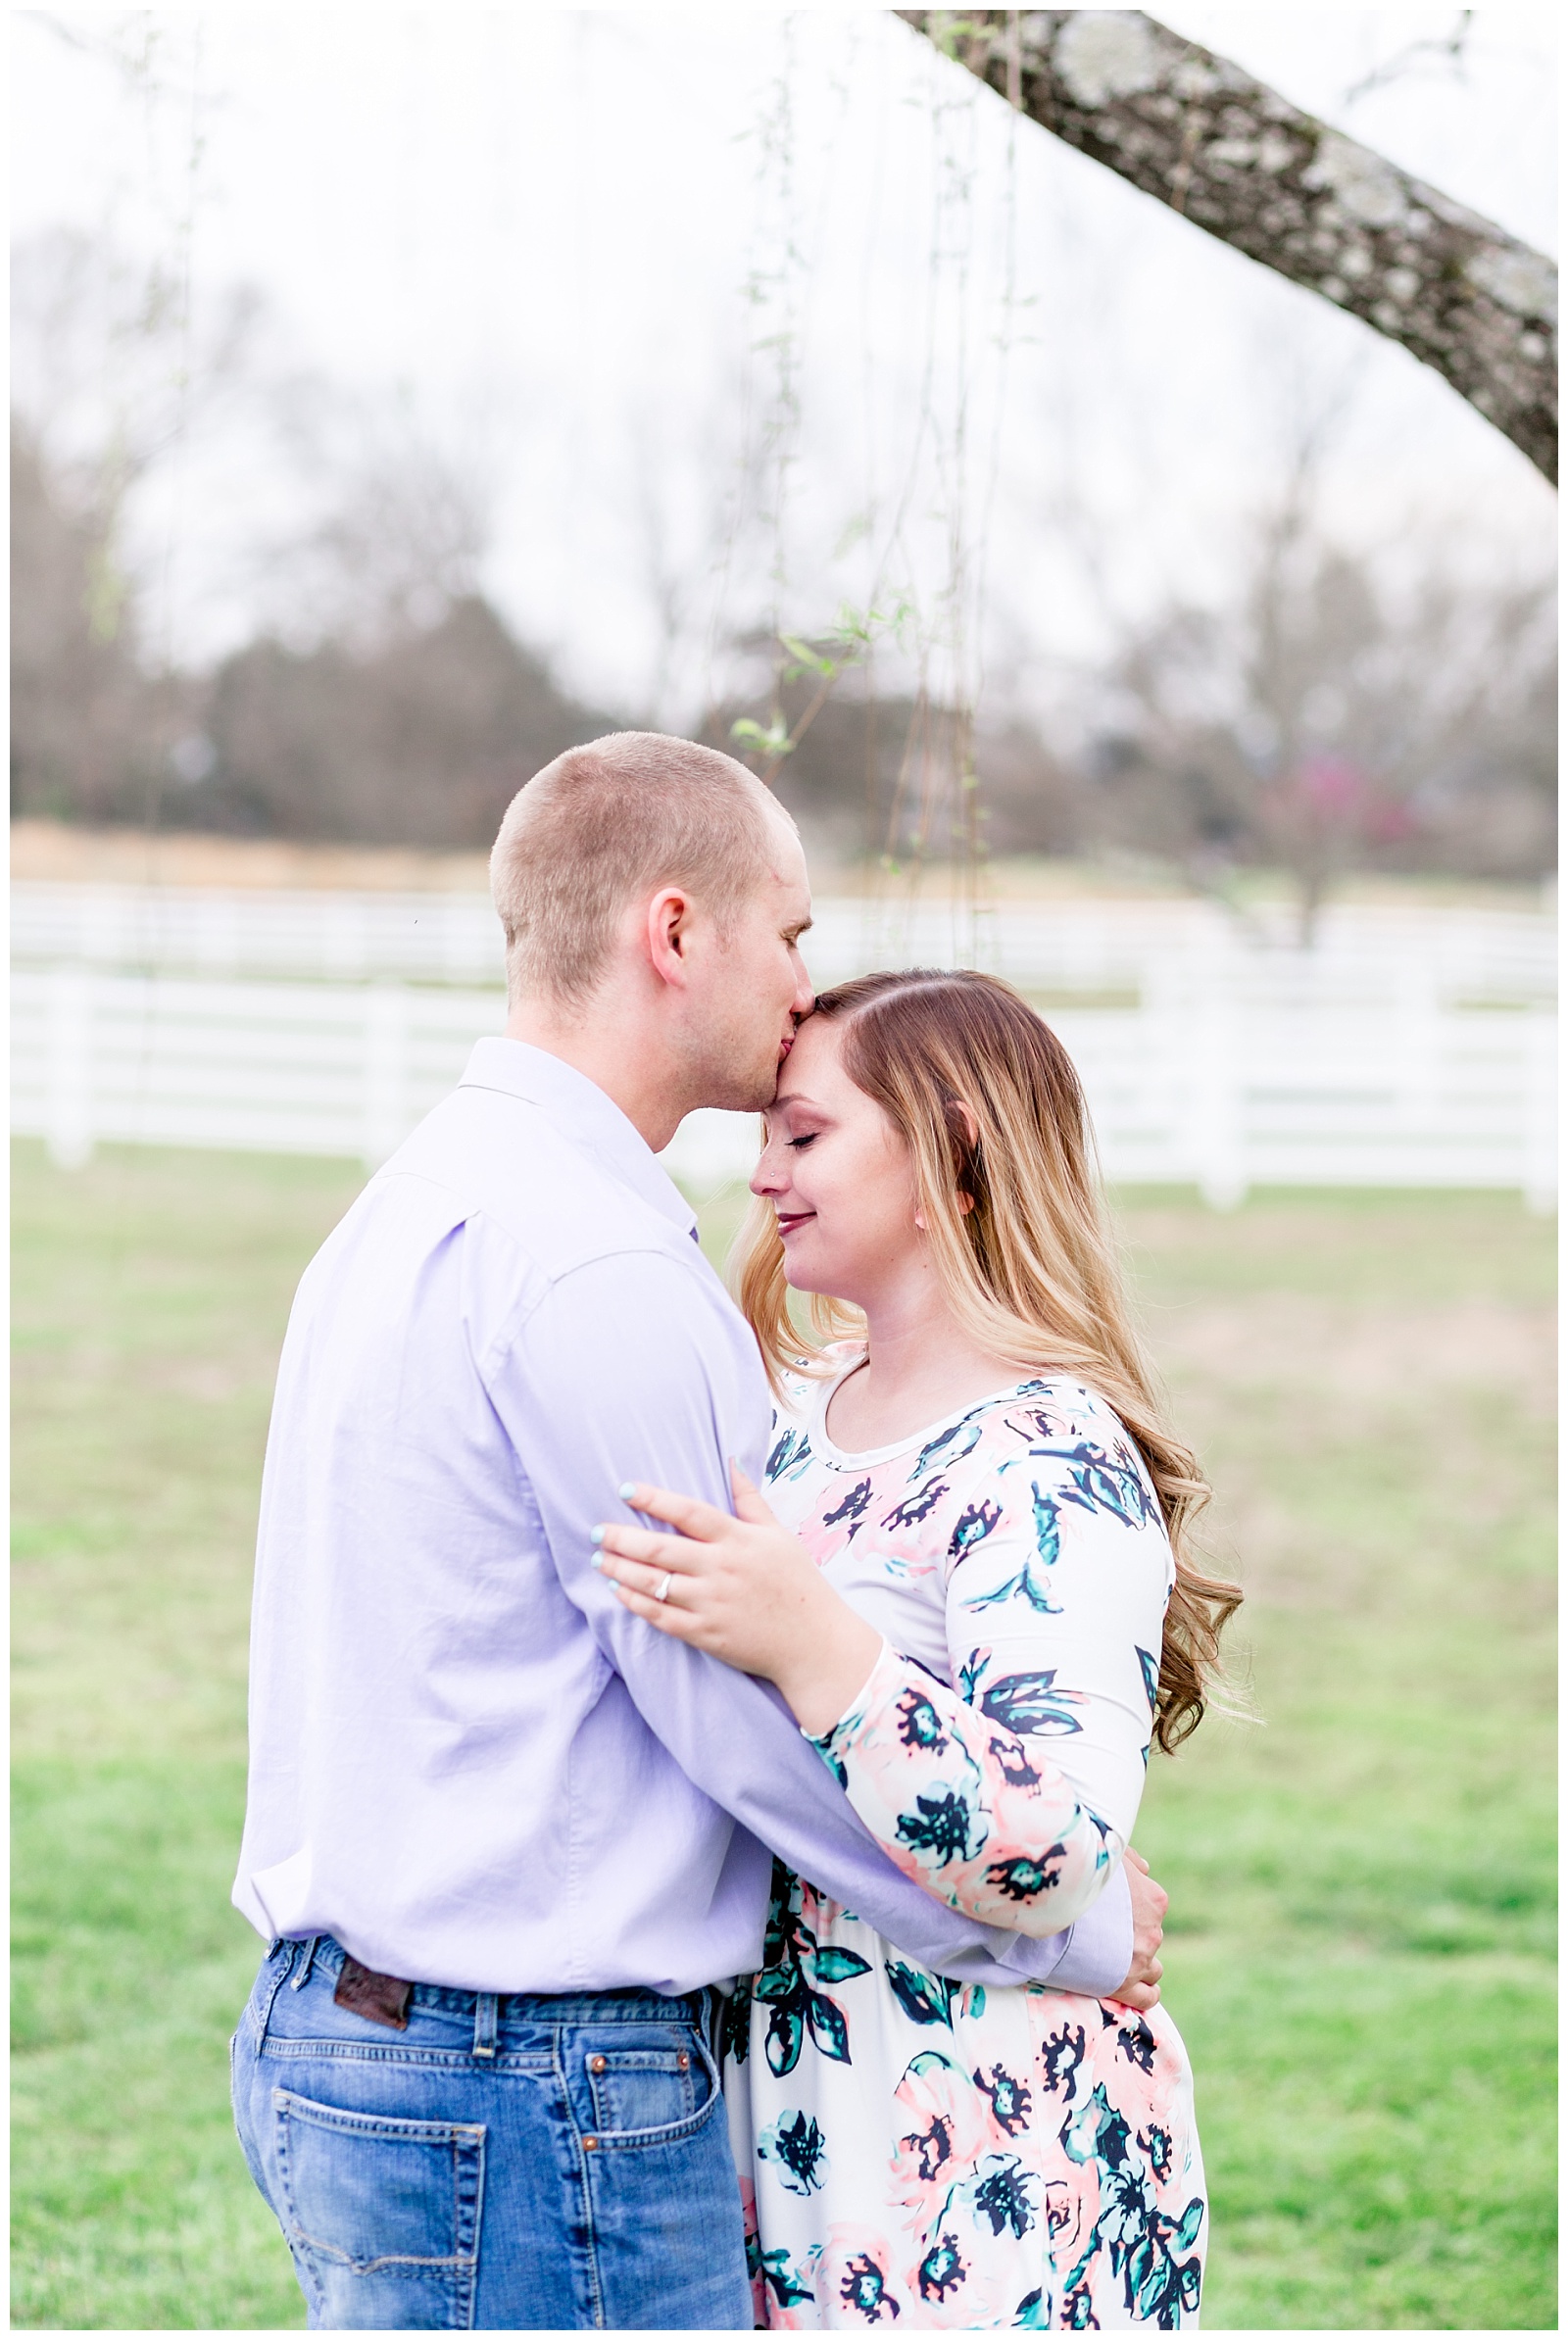 Southern Farm Engagement Session with Pastel and Floral Outfits under a Weeping Willow